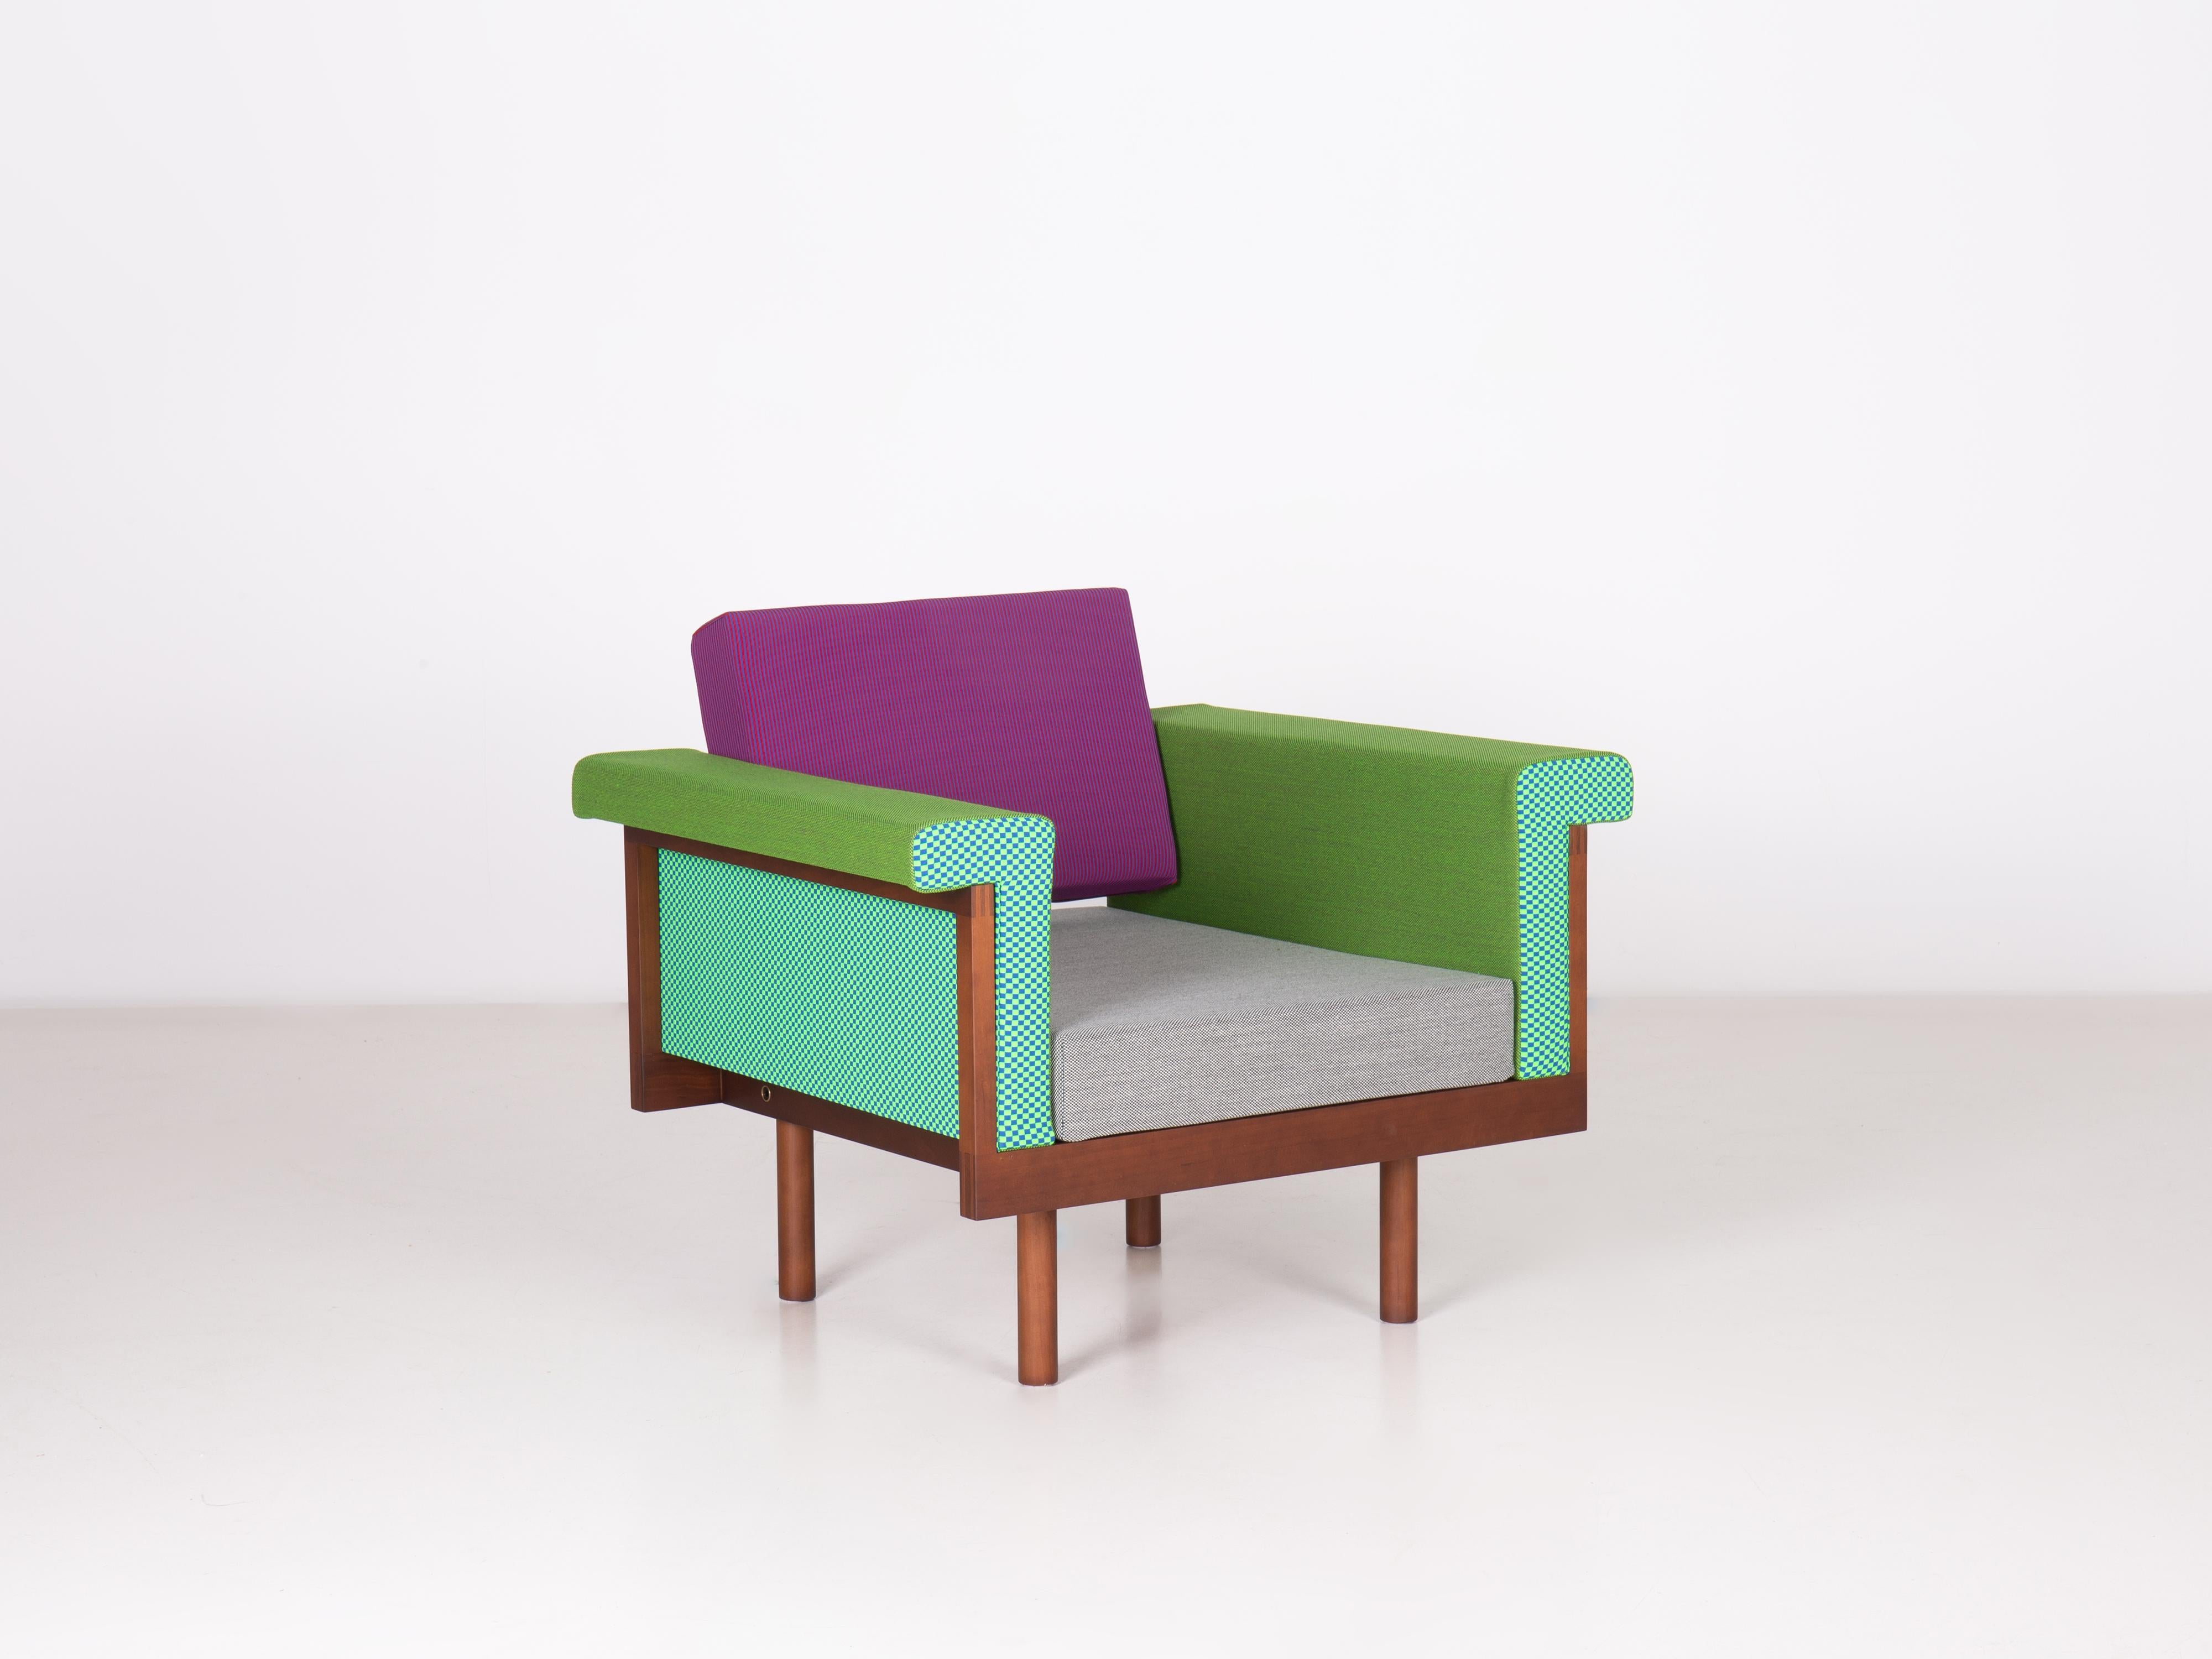 Designed in 1958 - Paradisoterrestre Edition 2023

Materials: cherry-wood structure, brass finishes, polyurethane foam padding,
upholstery in jacquard fabrics designed by Kiko Kostadinov and wool-blend Kvadrat fabrics.

A special edition by